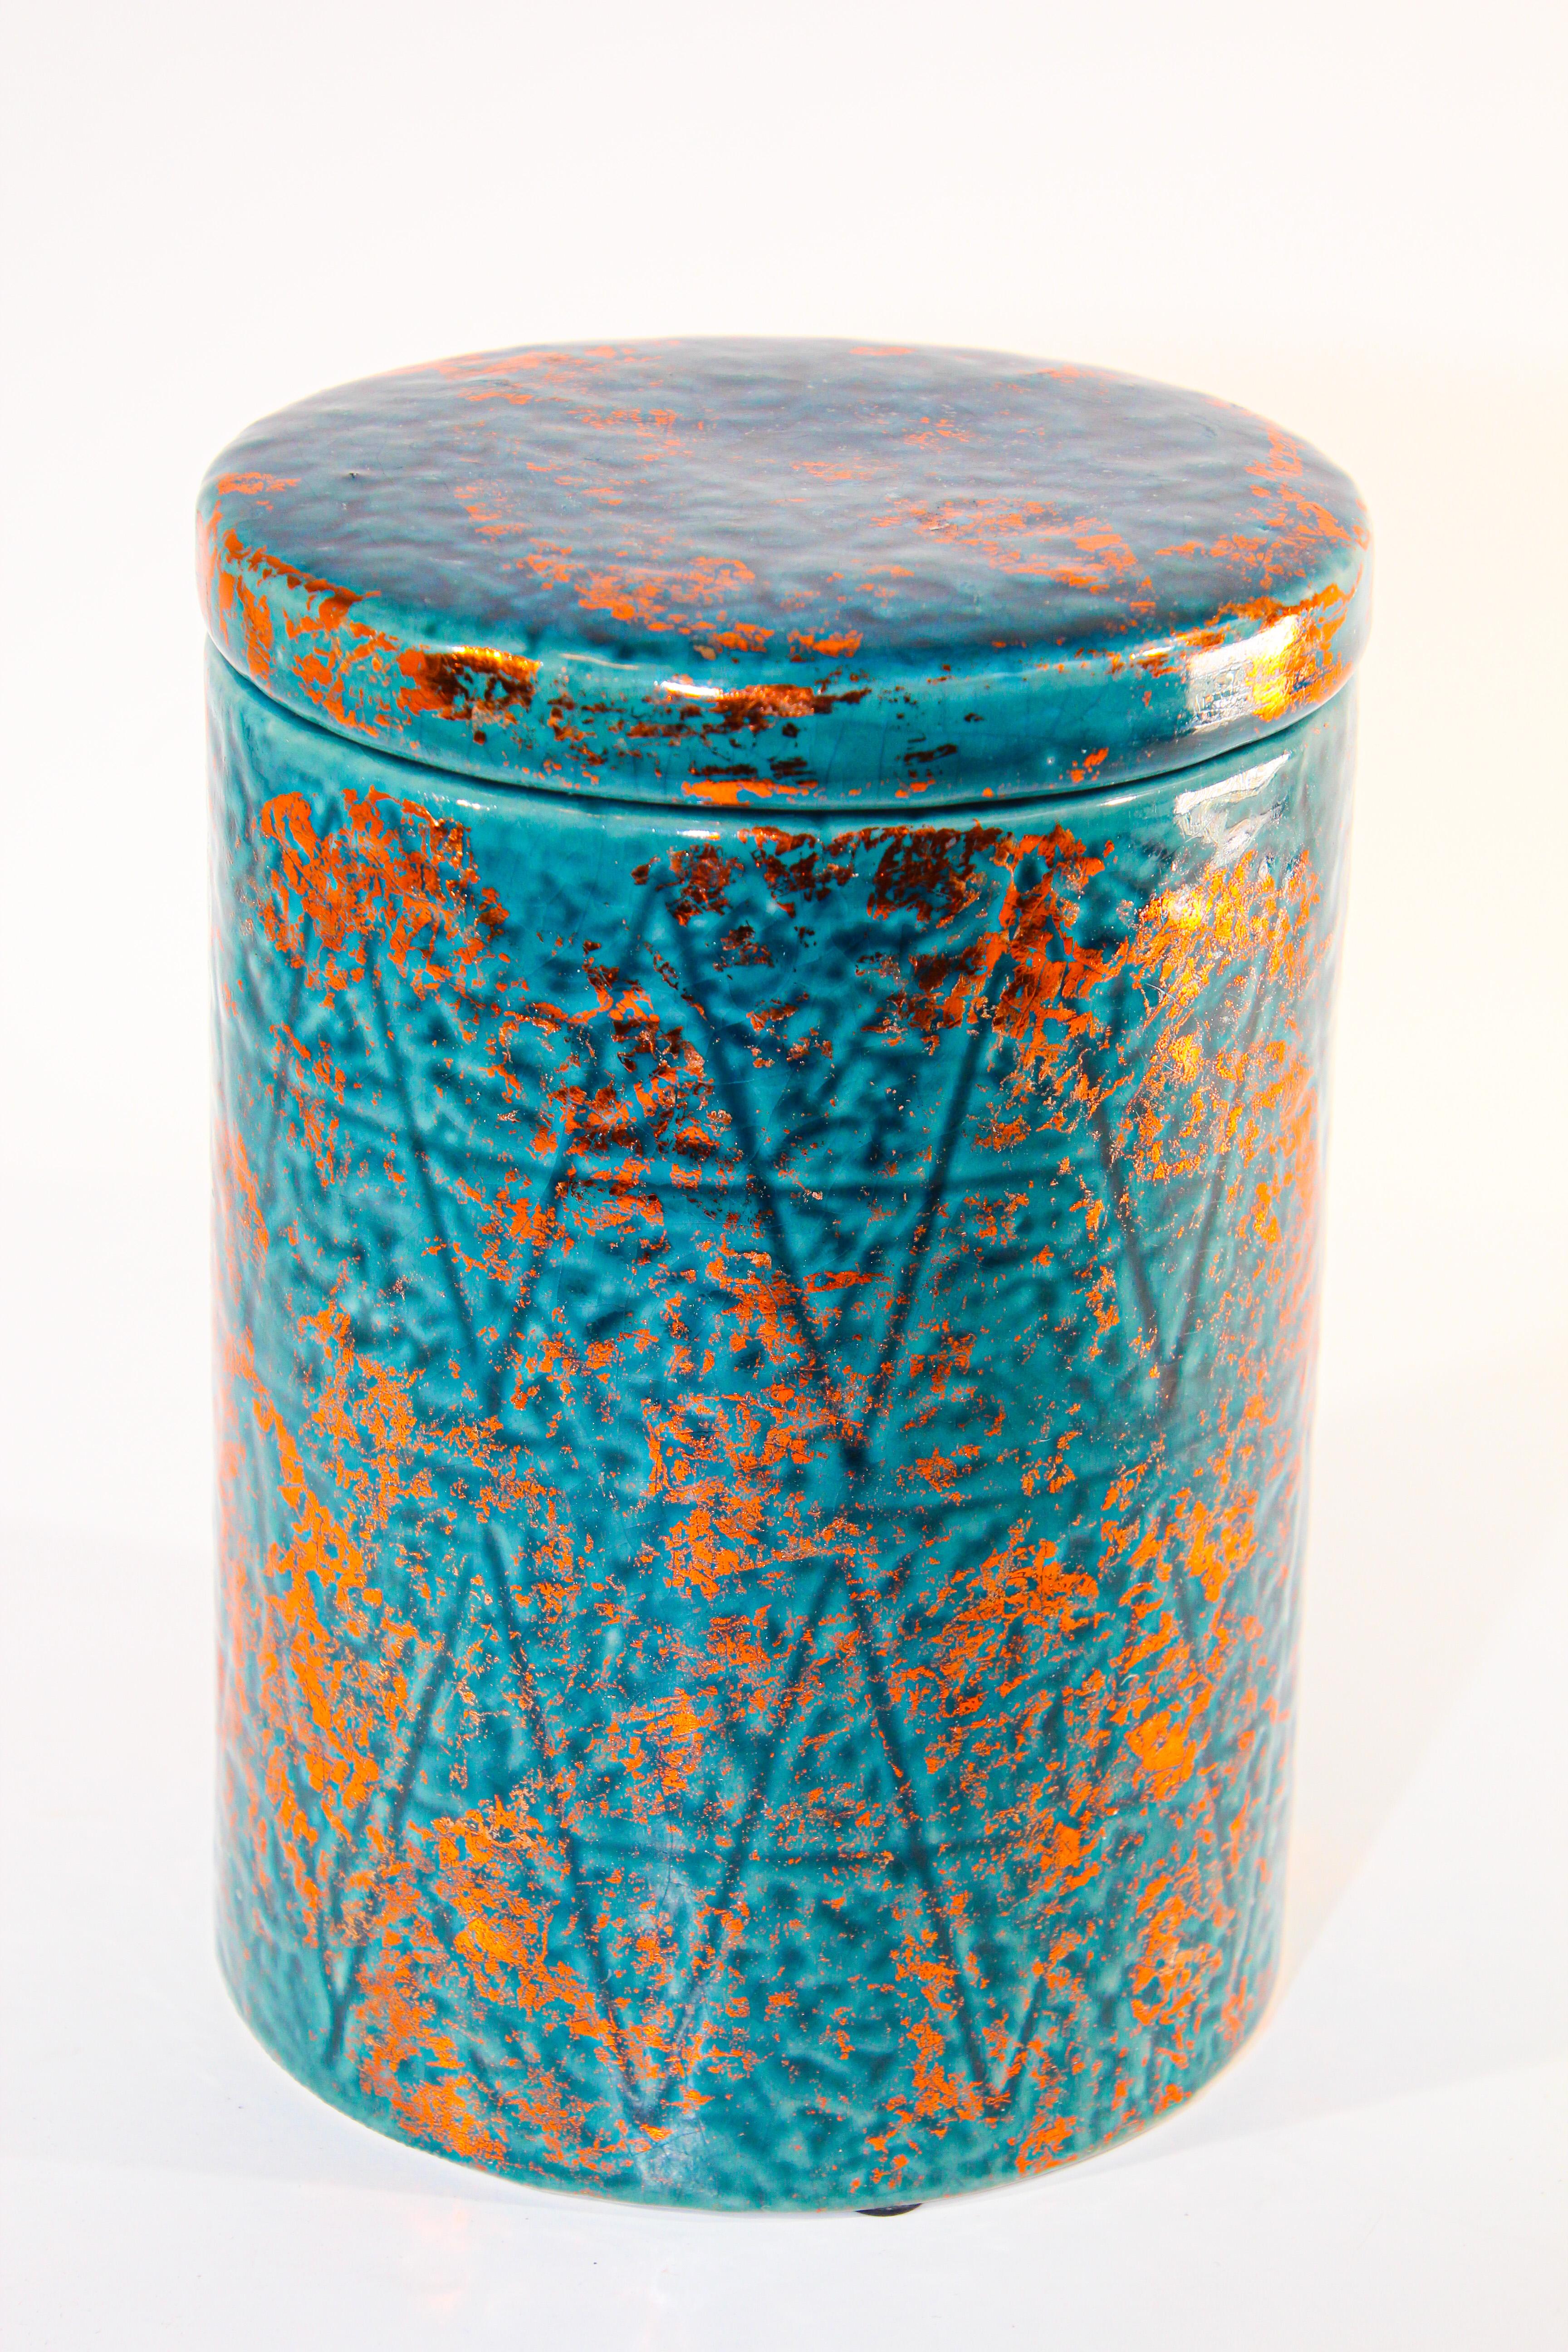 Moroccan ceramic urn with lid, blue with copper color.
Modern form with clean lines, textured design.
Great to use in the kitchen or in the bathroom or anywhere with any style, Bohemian, Moorish, Vintage, Traditional or Modern.
Great Folk Art